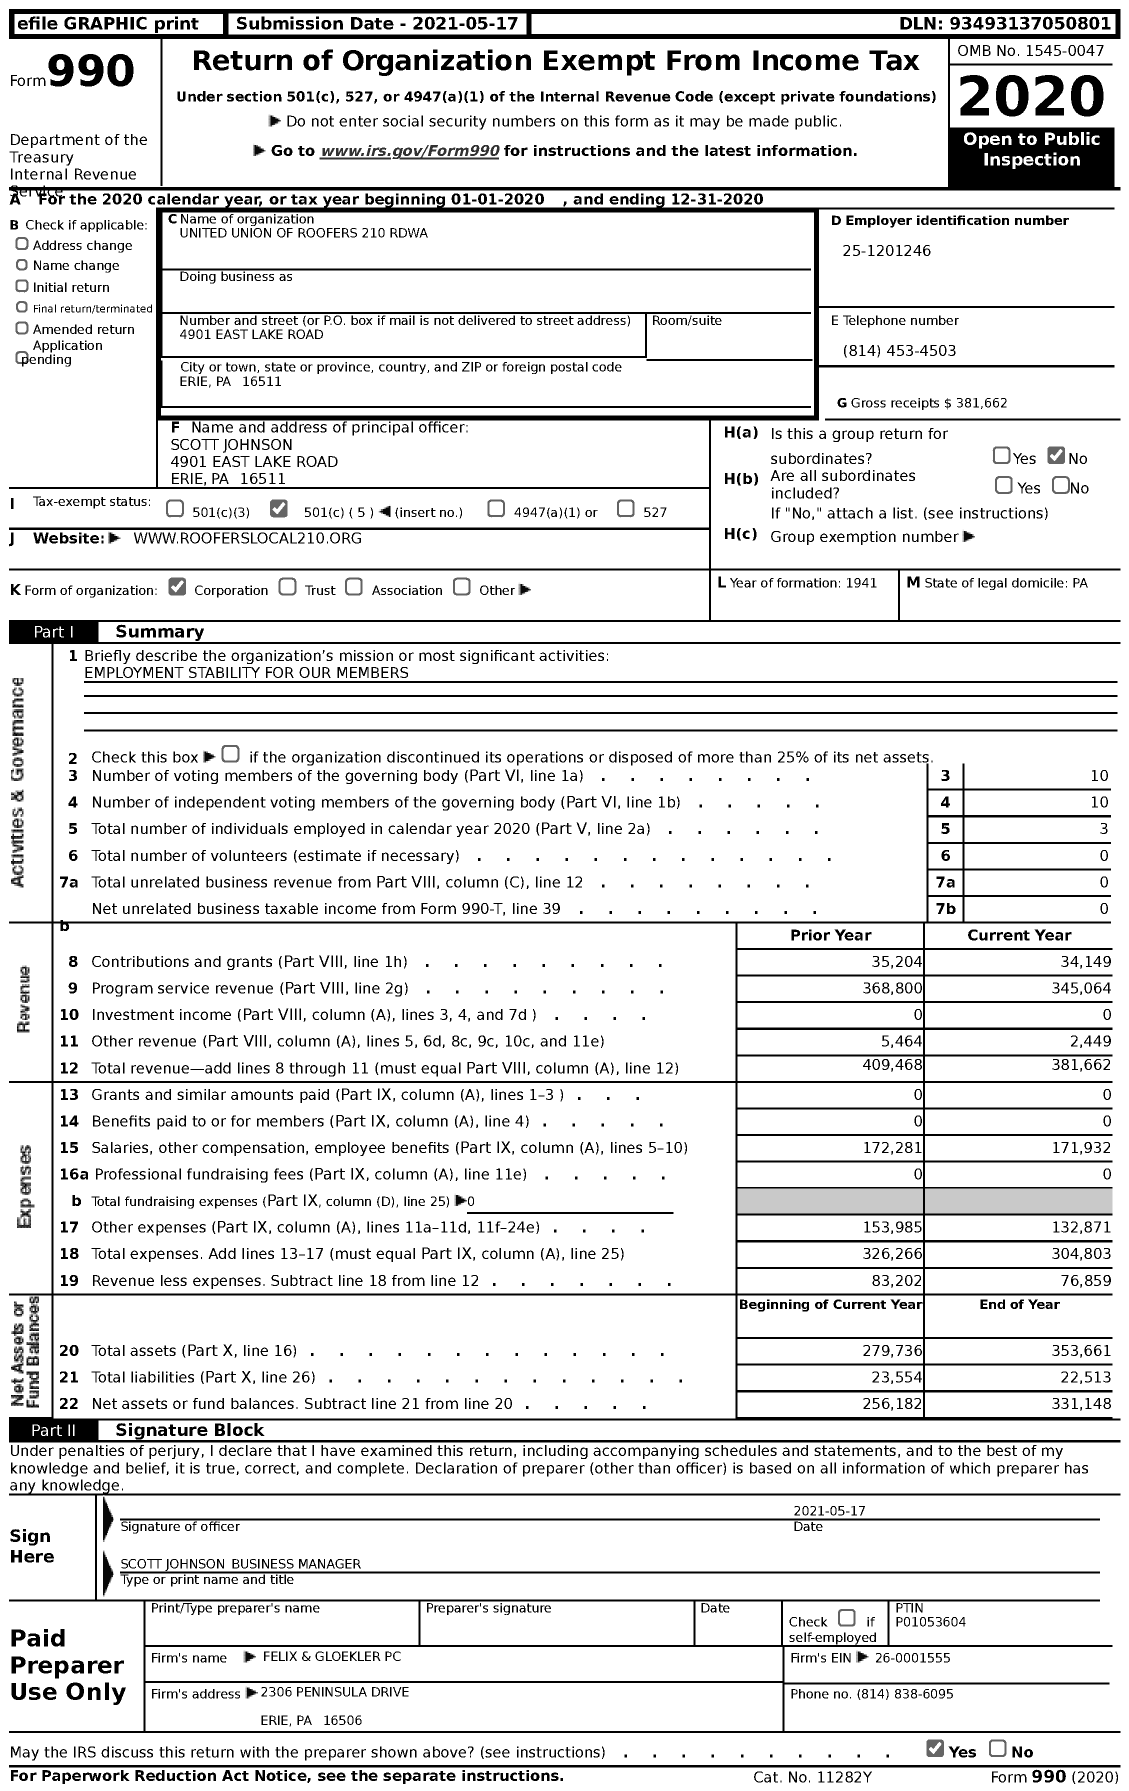 Image of first page of 2020 Form 990 for United Union of Roofers, Waterproofers and Allied Workers - 210 Rdwa